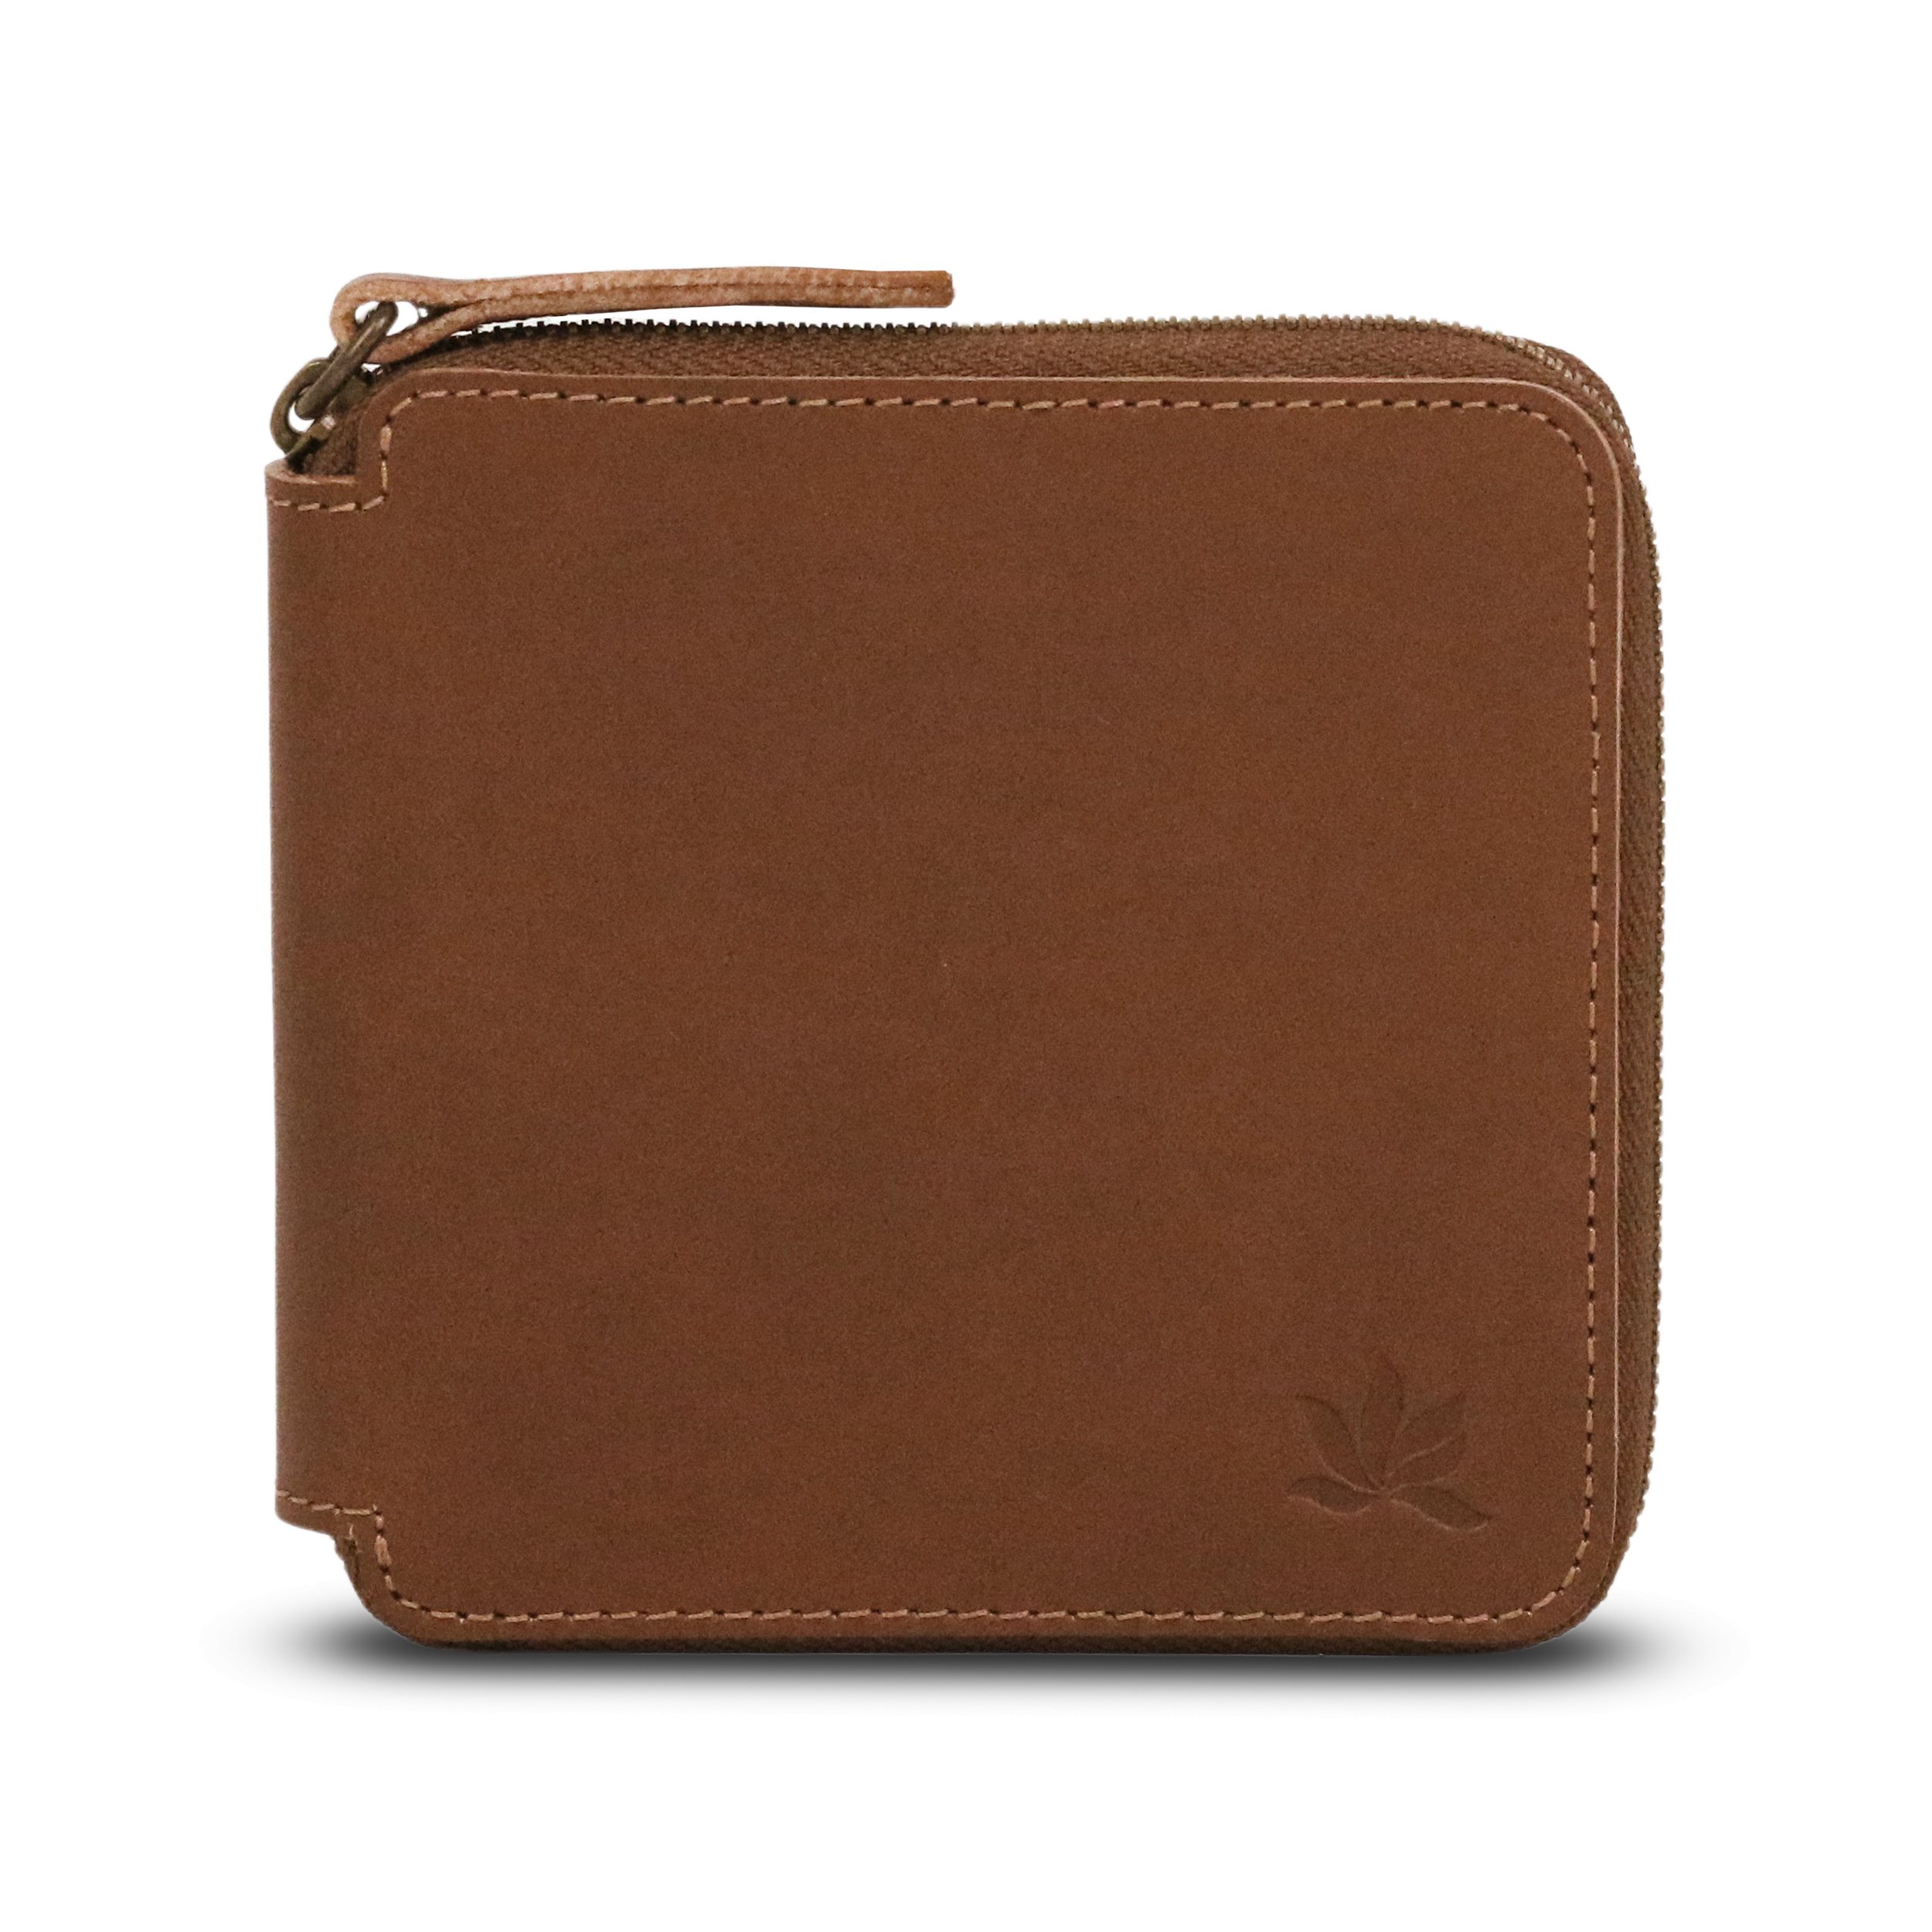 Zipped leather wallet